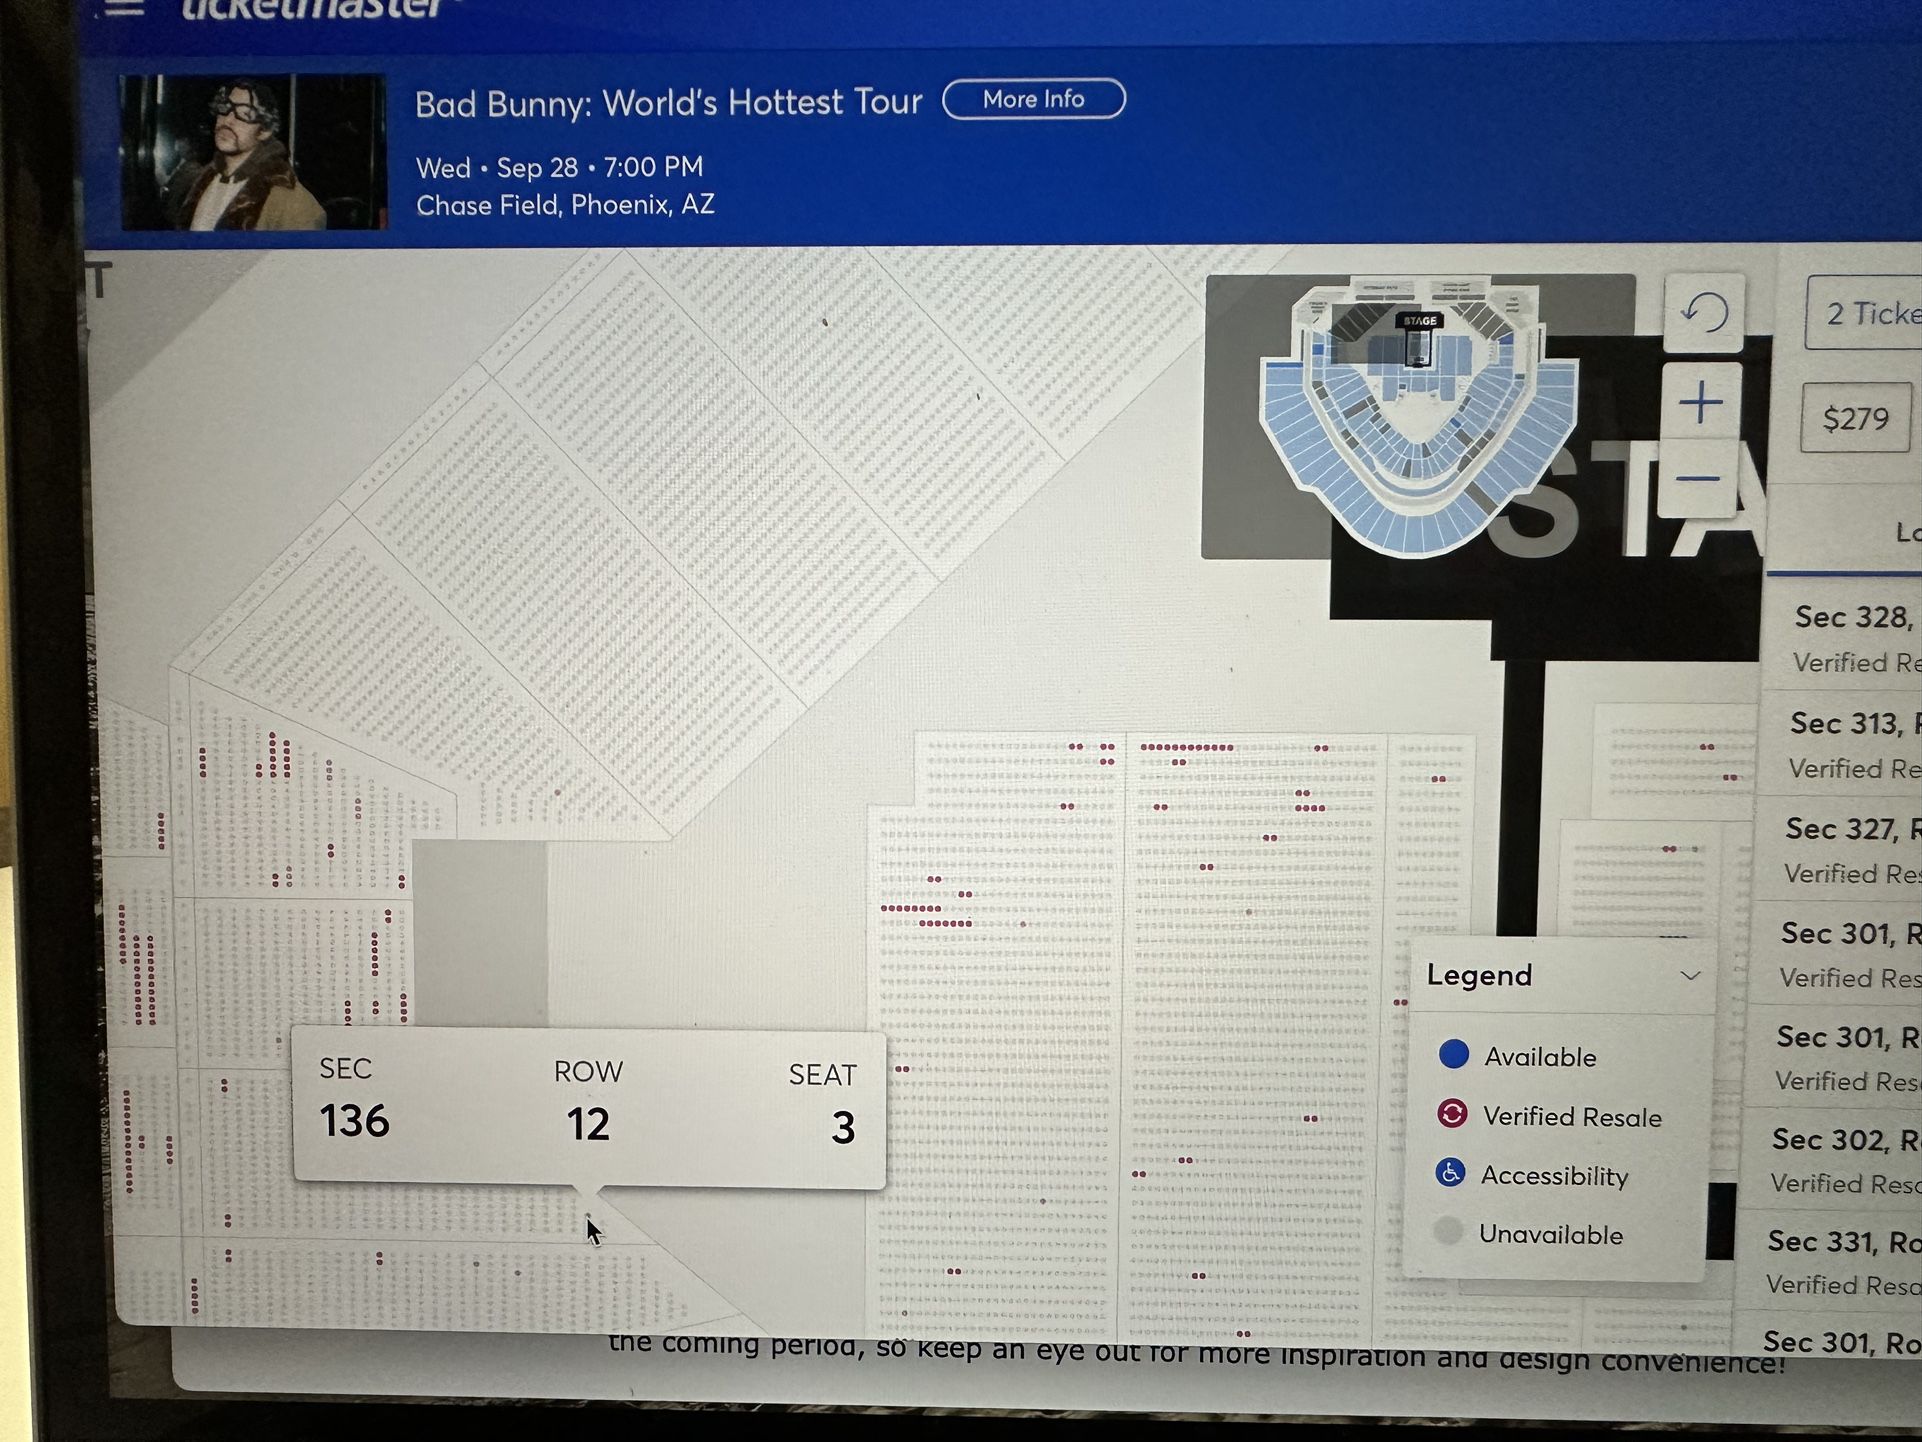 3 Bad Bunny Tickets Right Behind First Row Of Section